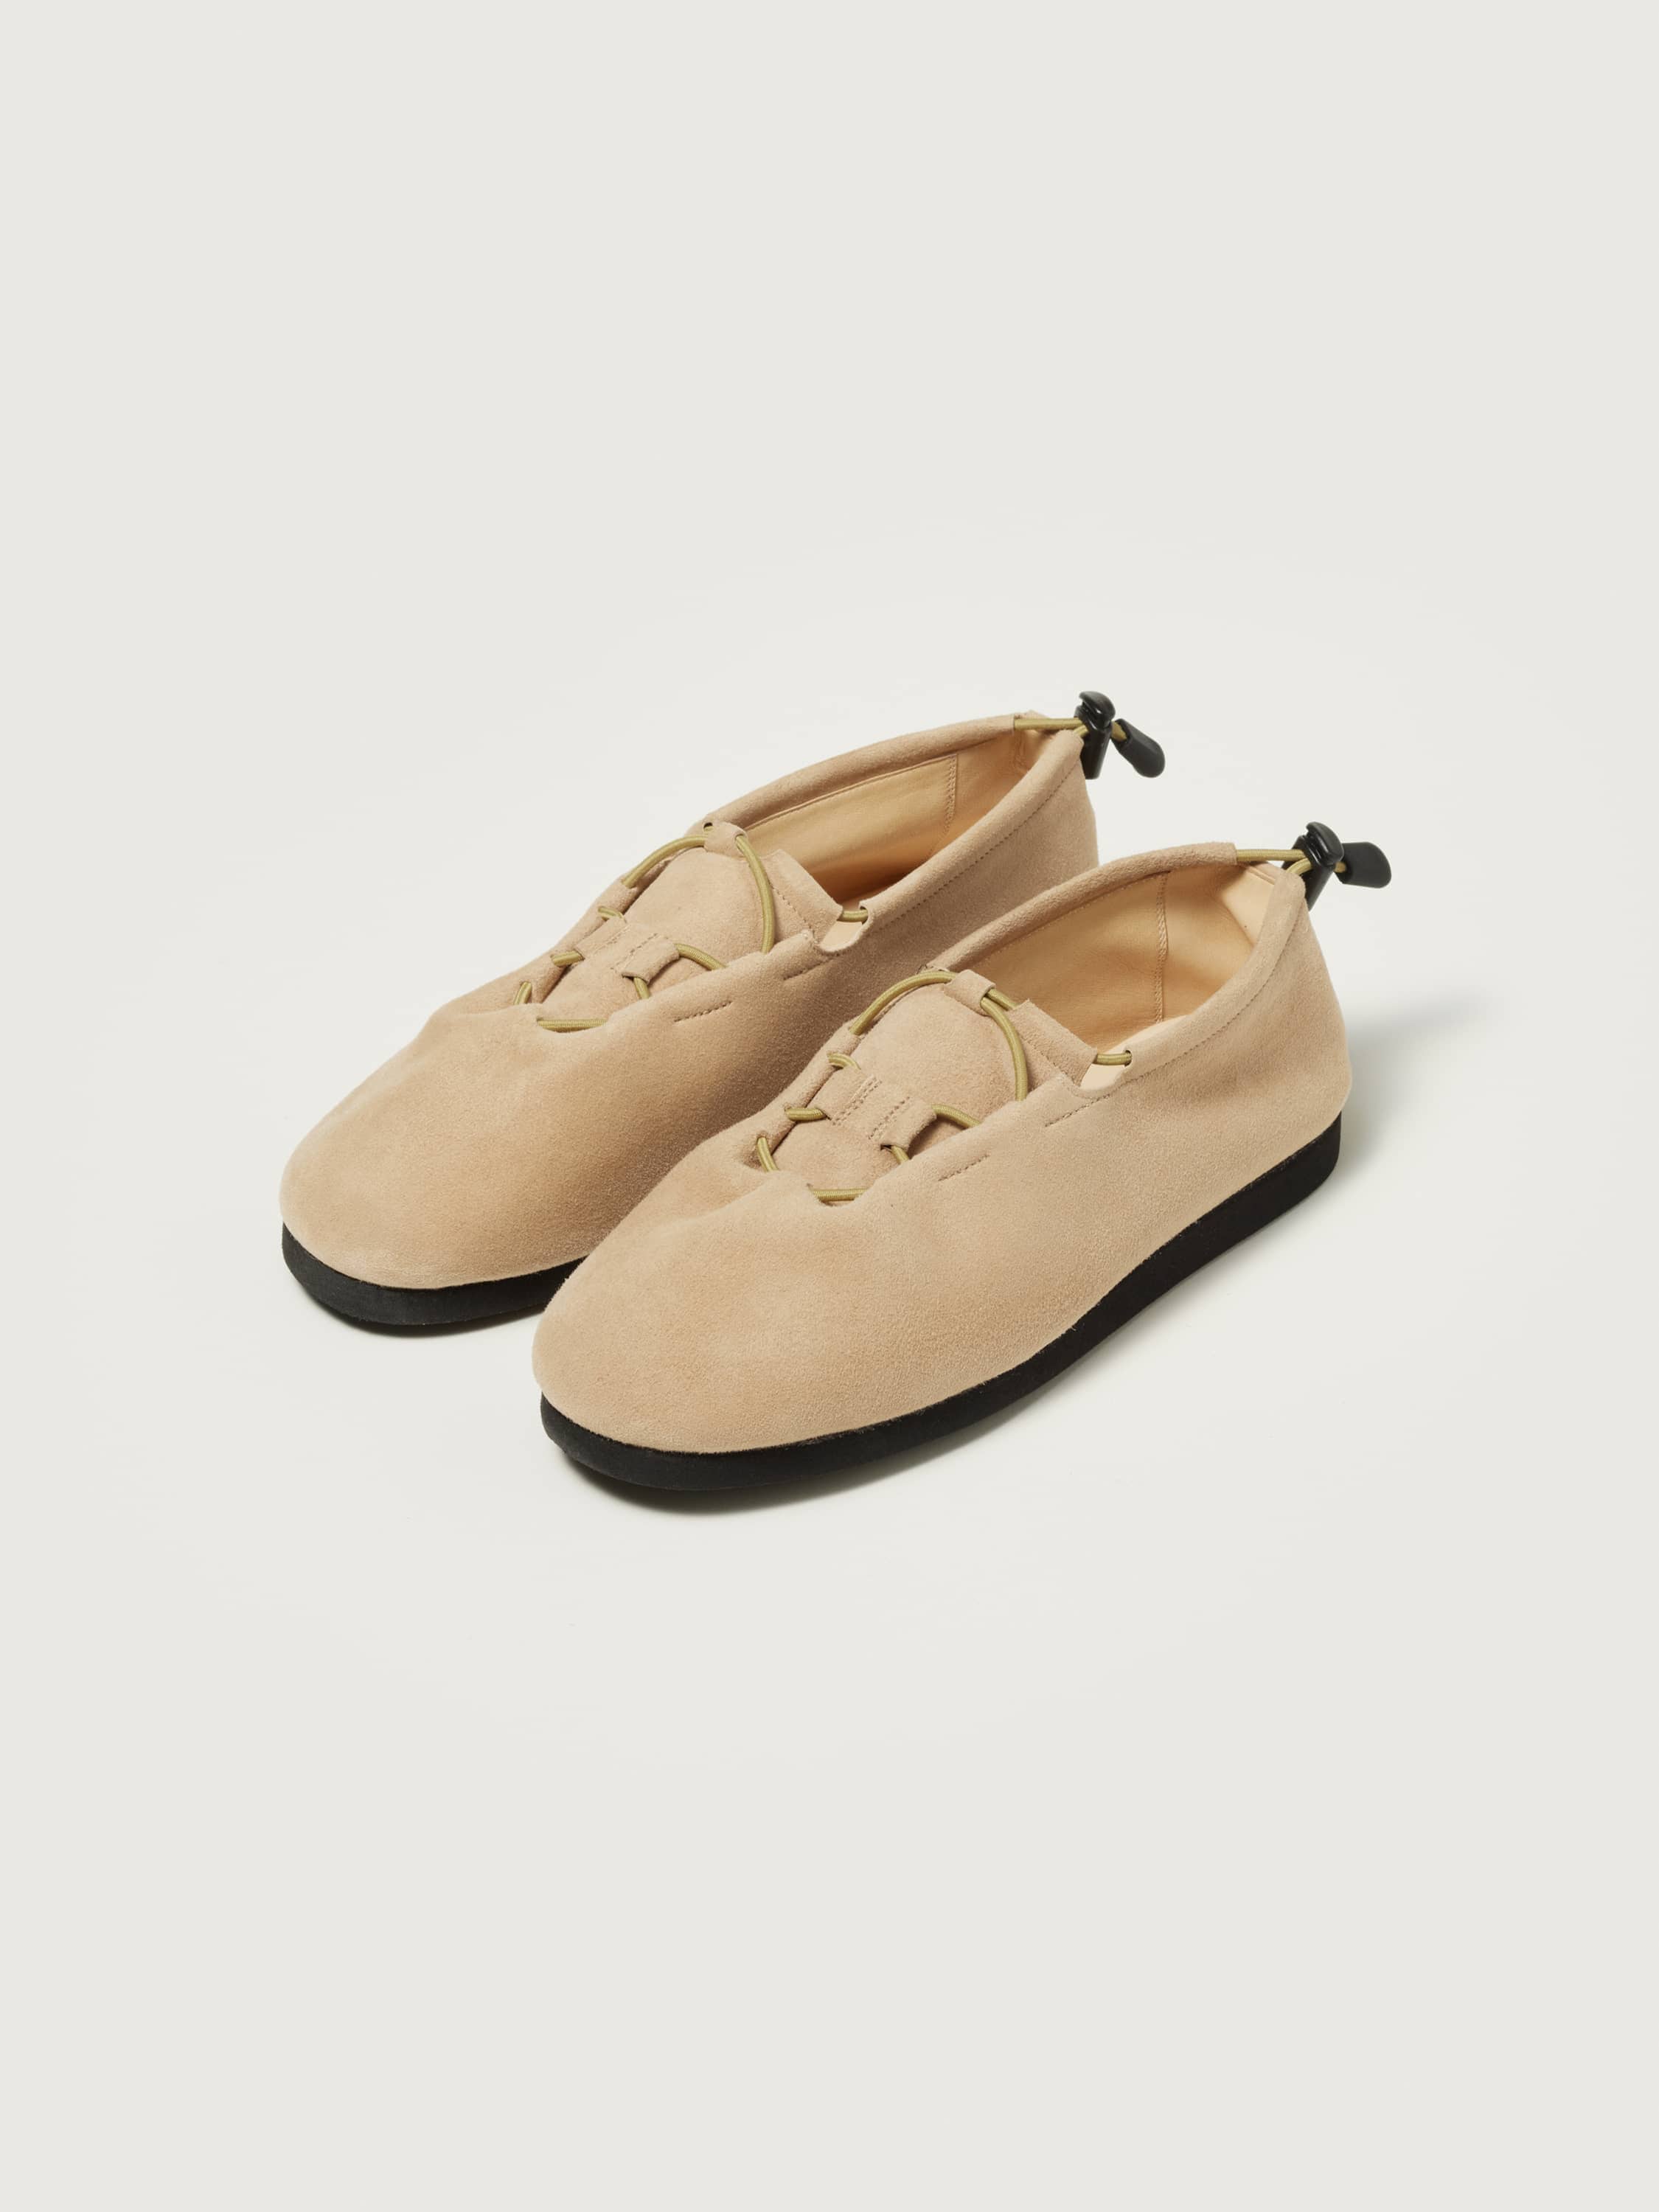 LAMB SUEDE CORD SHOES MADE BY FOOT THE COACHER 詳細画像 BEIGE 3